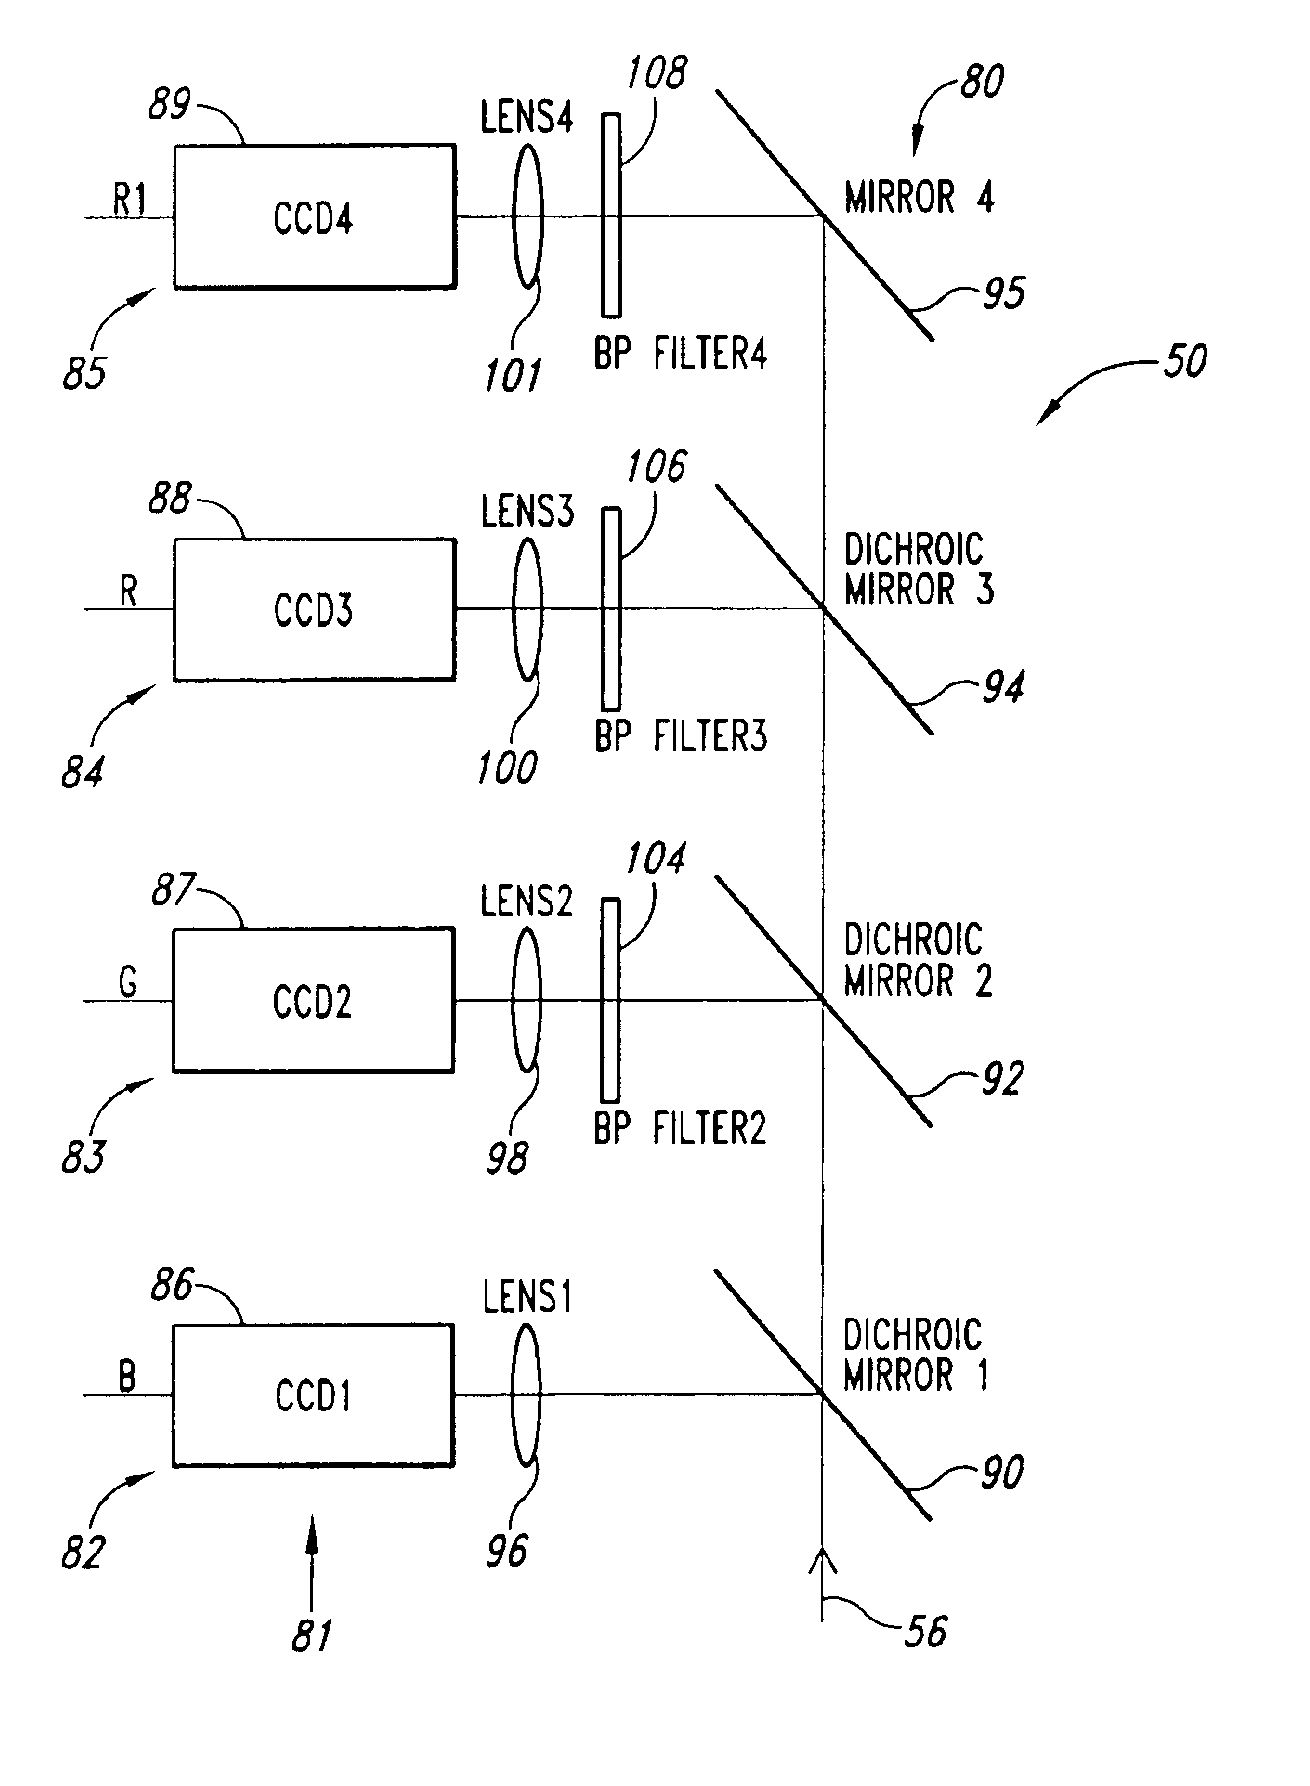 Methods and apparatus for fluorescence and reflectance imaging and spectroscopy and for contemporaneous measurements of electromagnetic radiation with multiple measuring devices